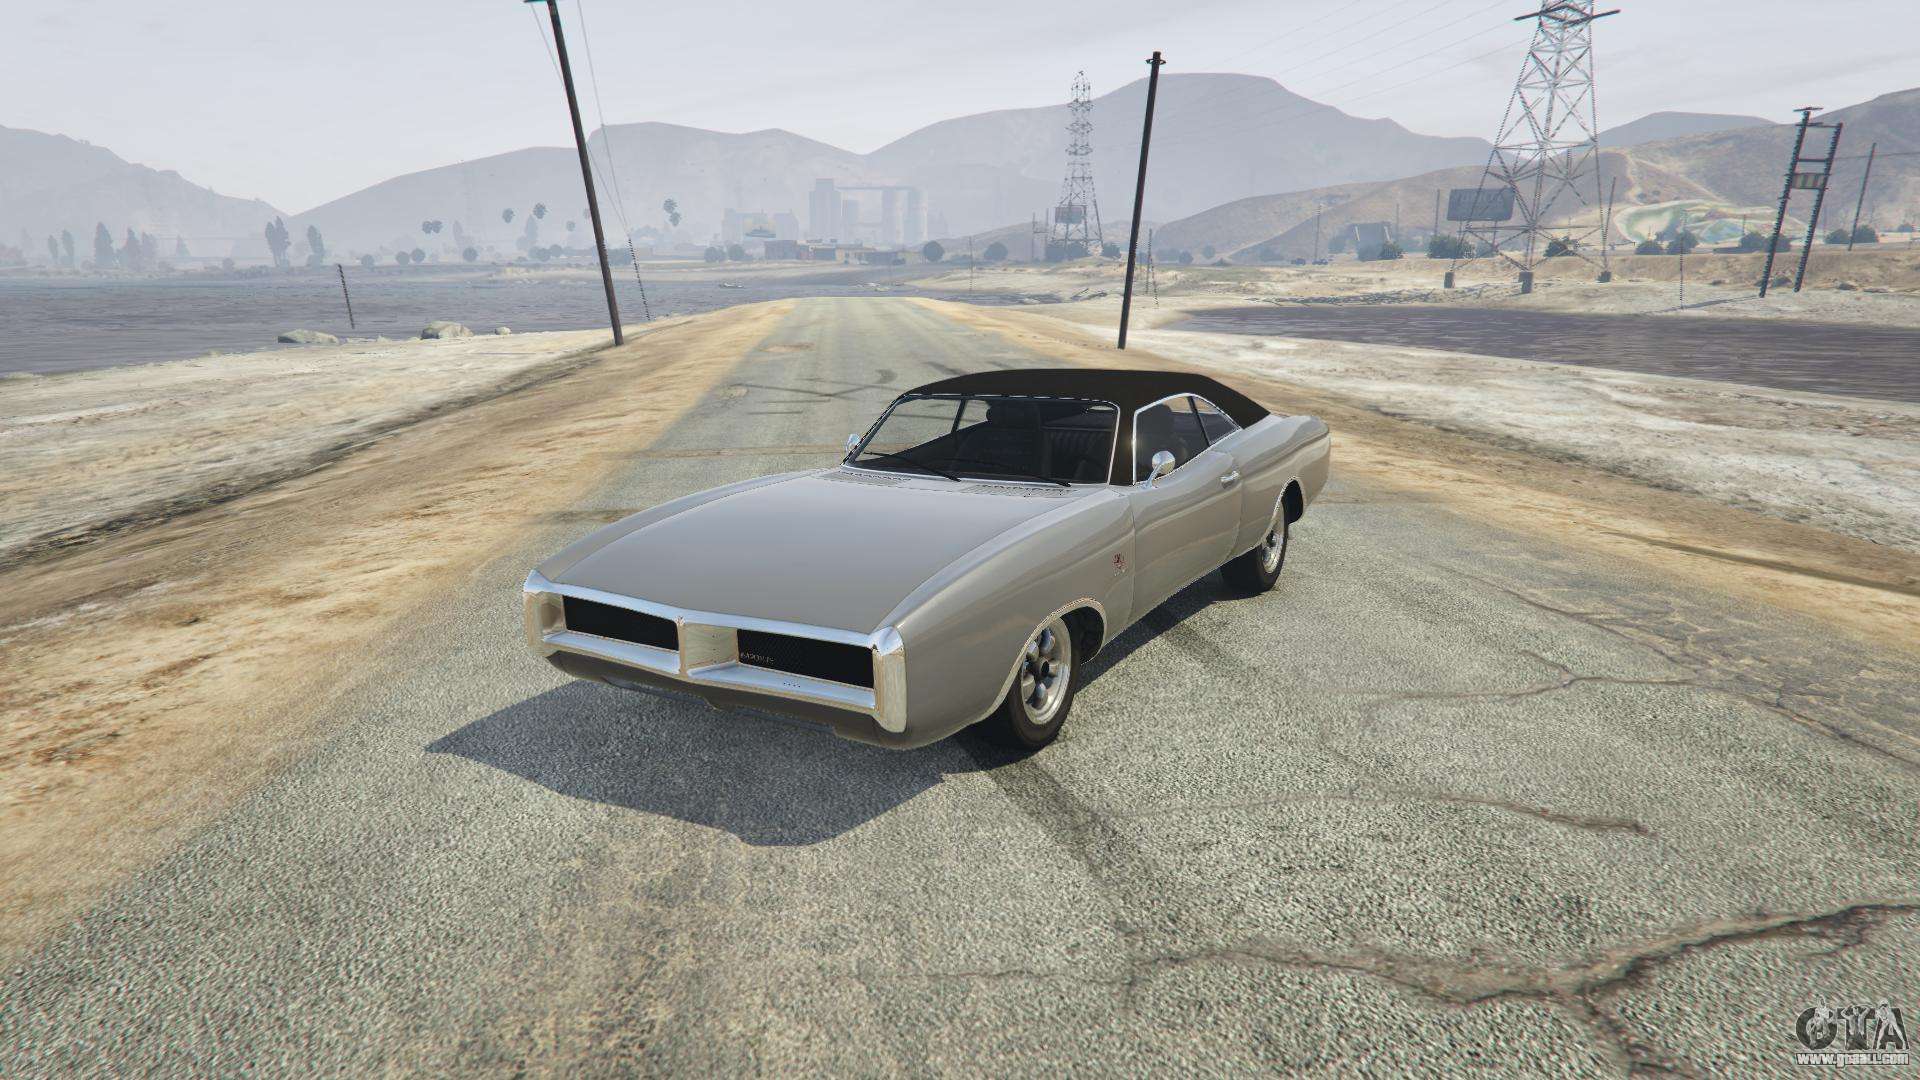 Imponte Dukes of GTA 5 - front view